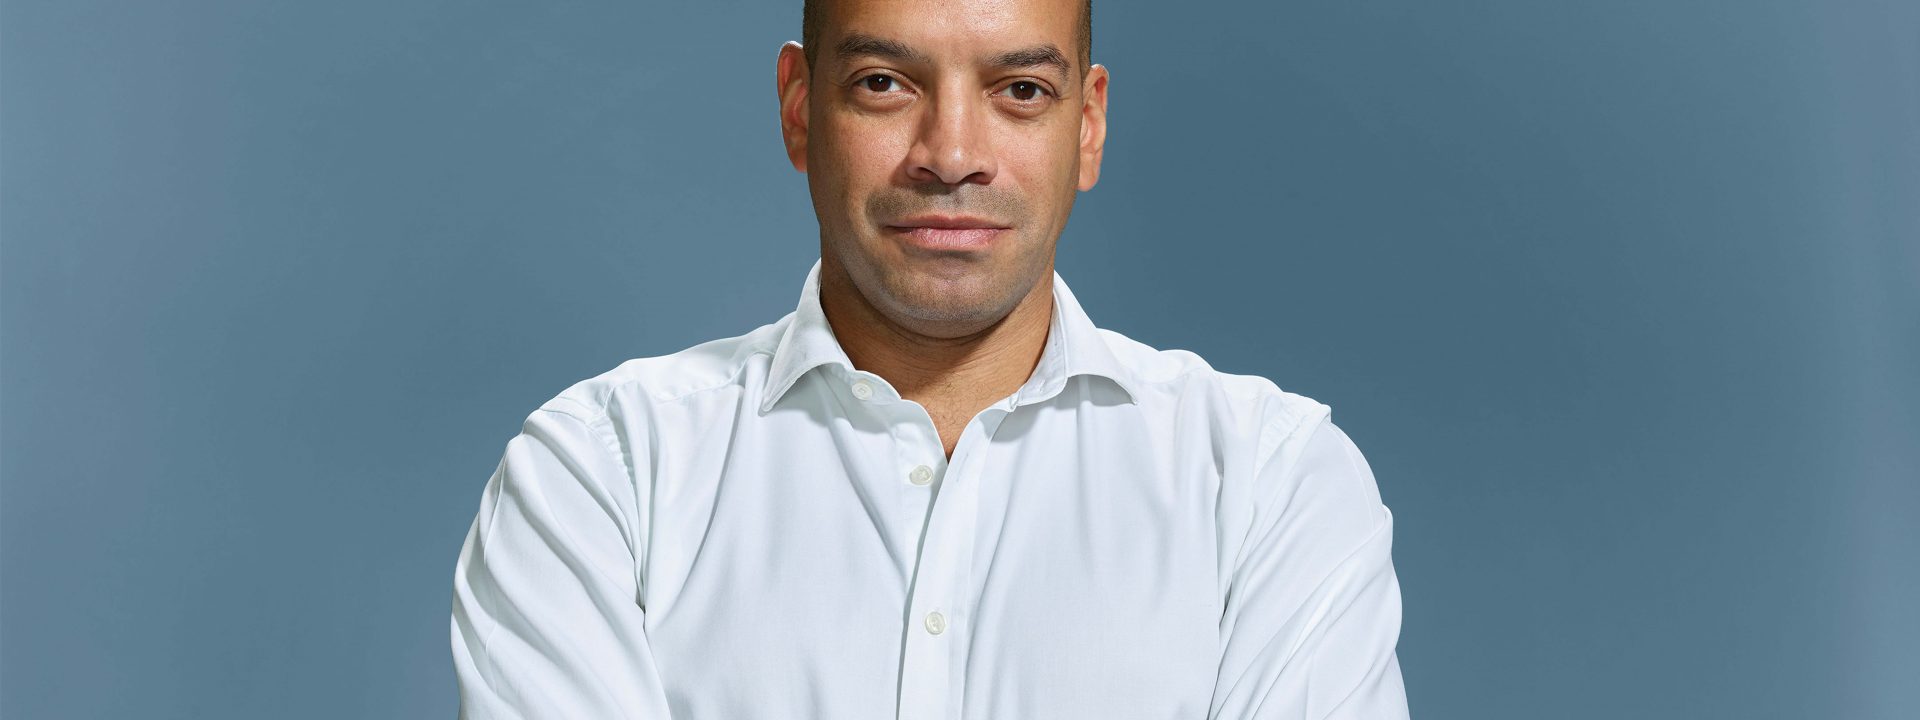 Headshot image where Dougie looks face-on at the camera, he is wearing a white shirt and has his arms crossed.